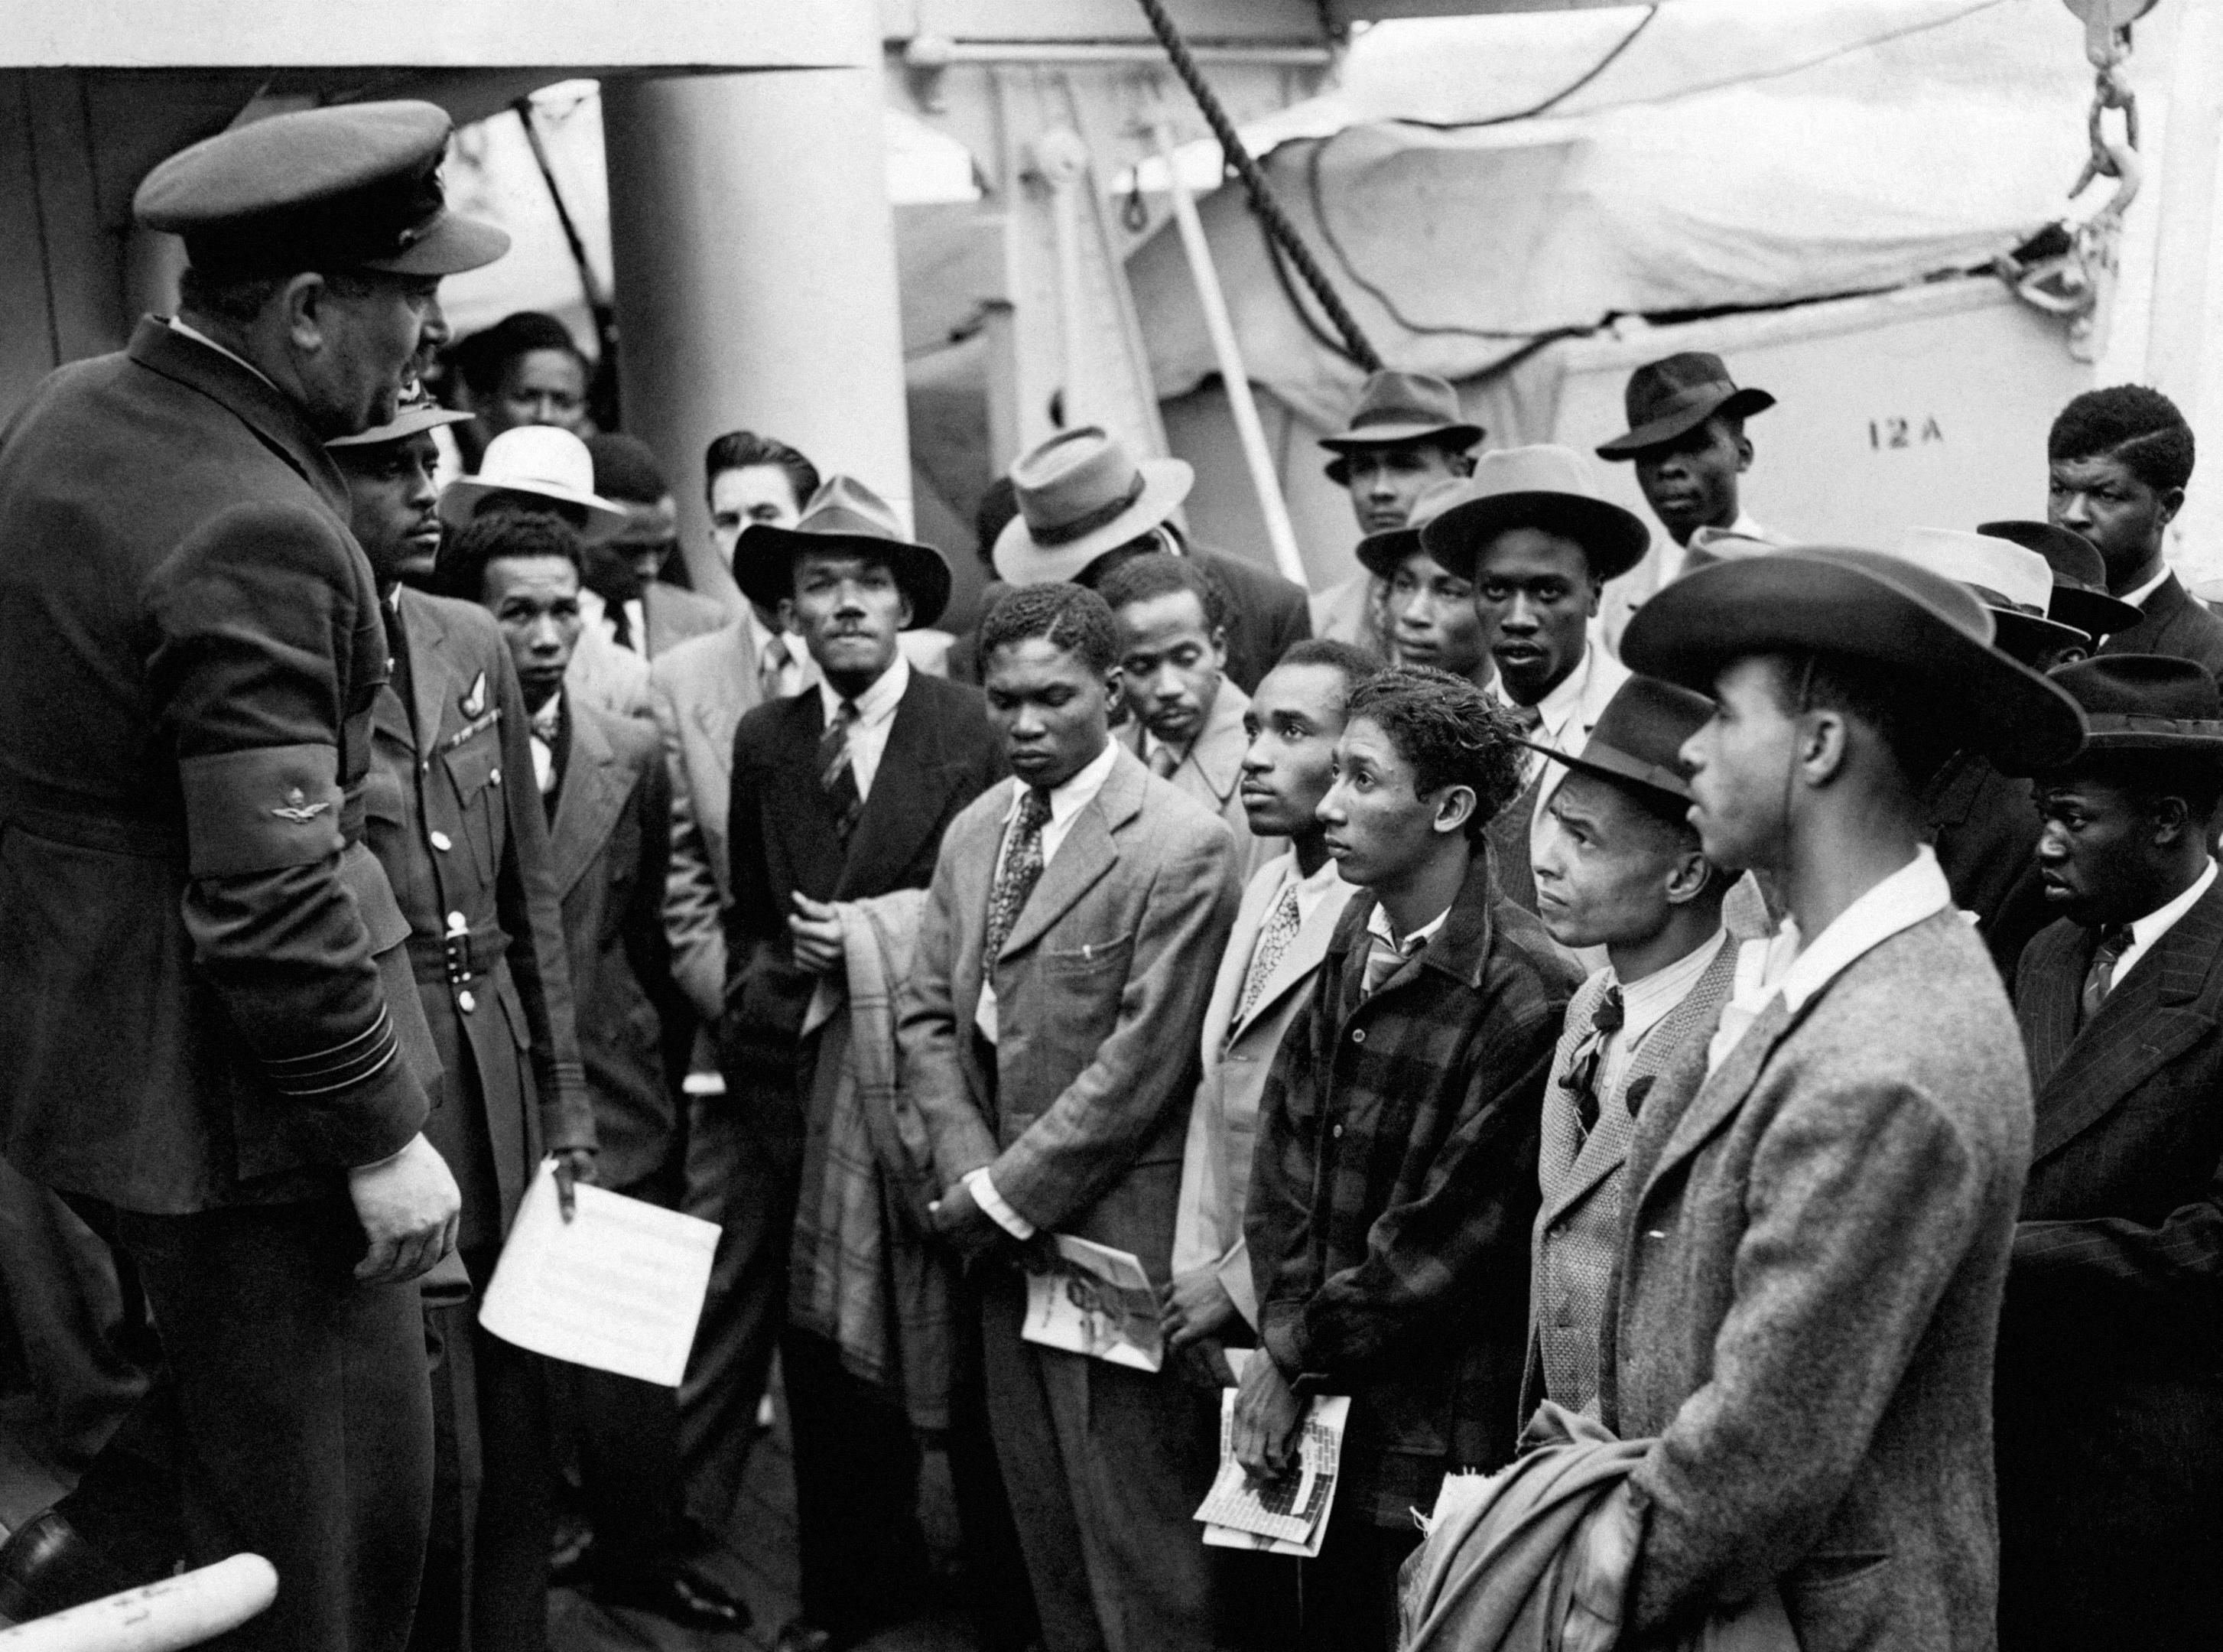 Jamaican immigrants with RAF officials from the Colonial Office after the ex-troopship HMT "Empire Windrush" landed them at Tilbury in Essex in 1948.